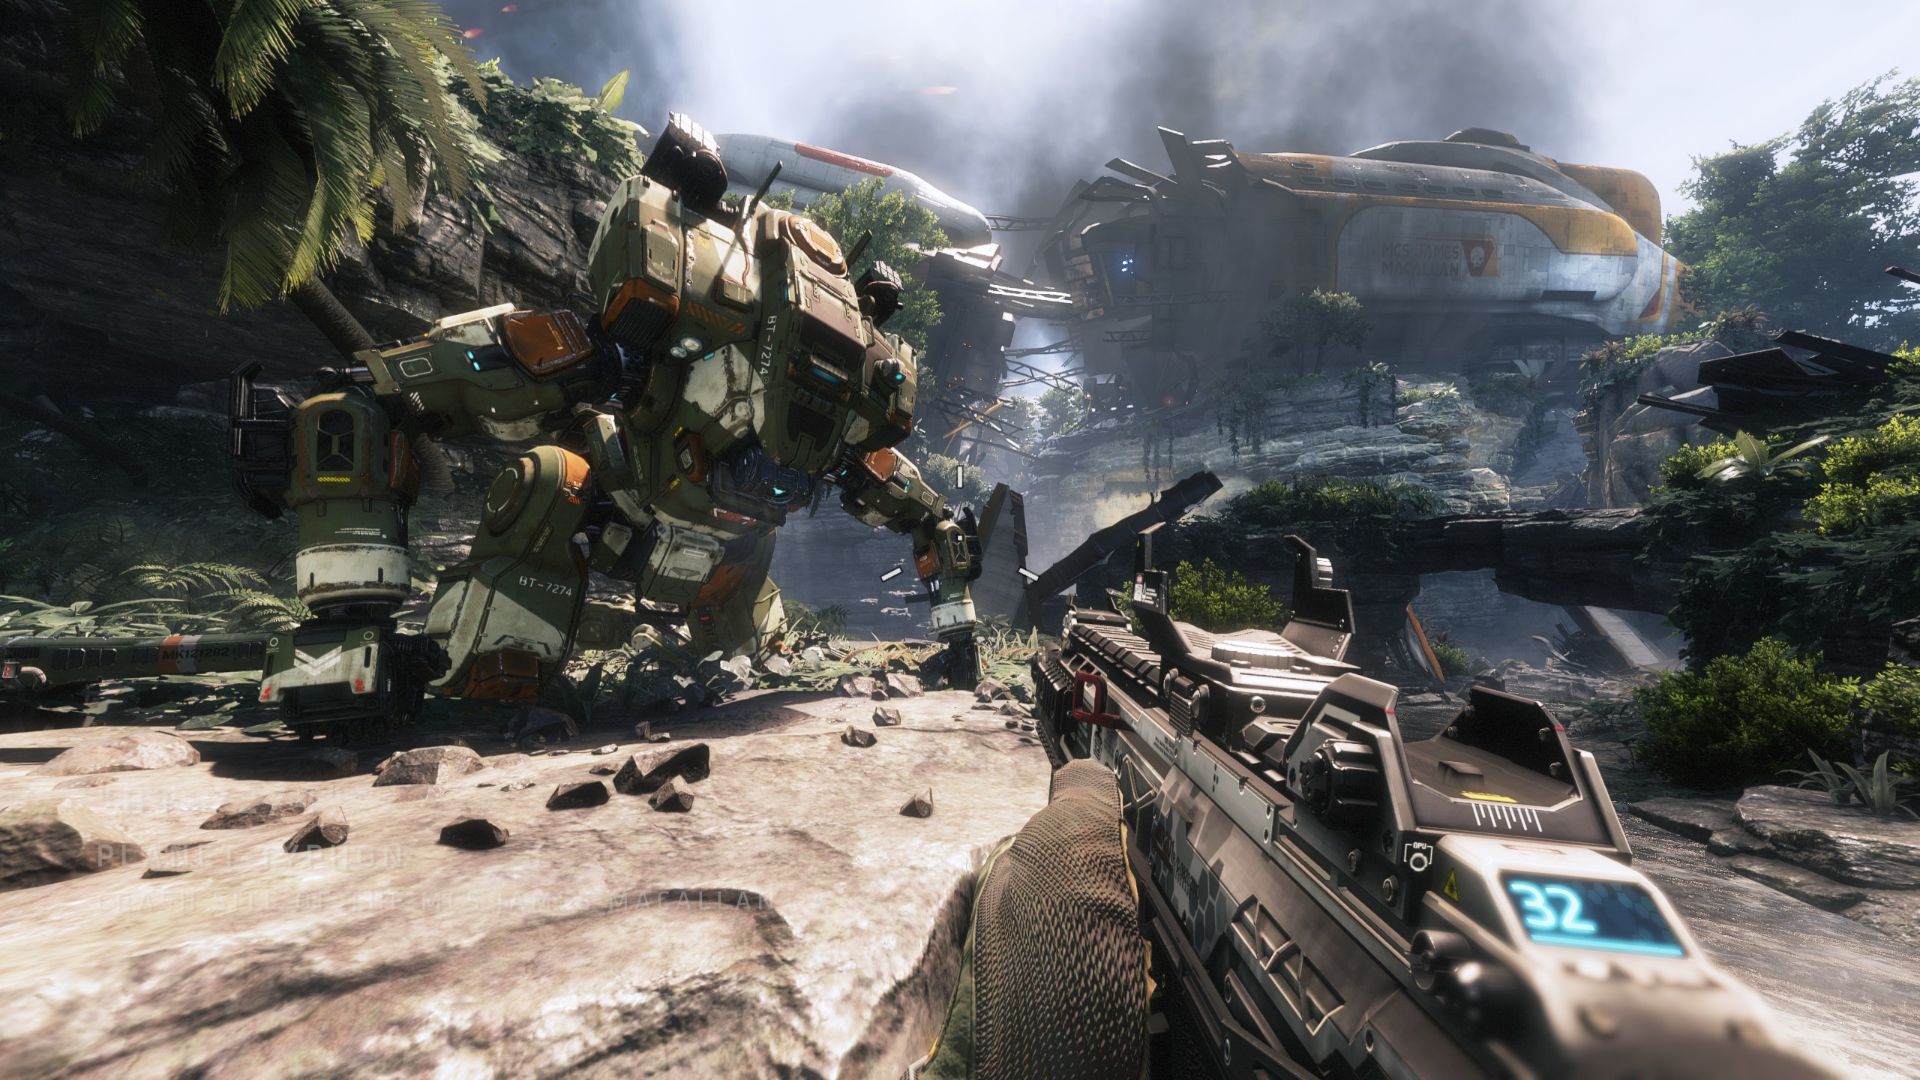 Best Xbox FPS games: A soldier watches a mech fight someone in Titanfall 2